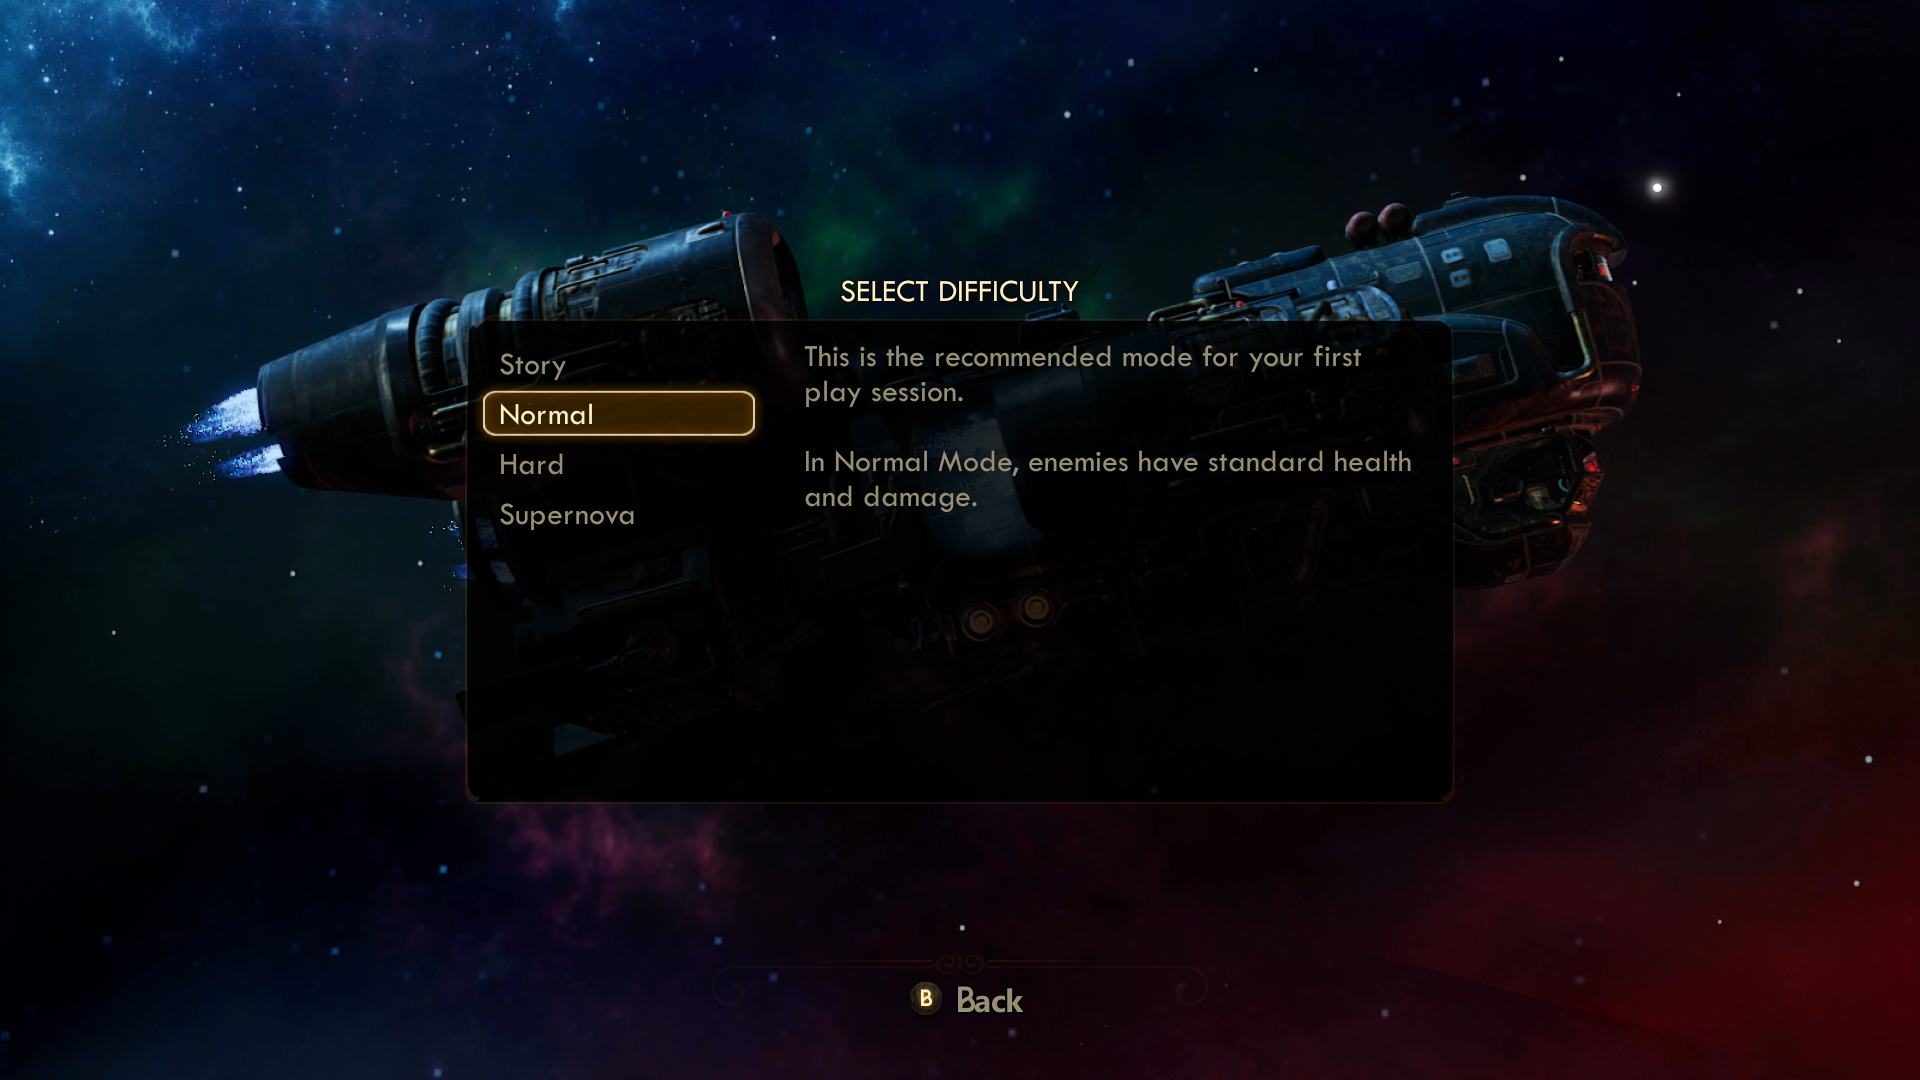 Screenshot from The Outer Worlds, showing a difficulty selection screen with "Story," "Normal," "Hard," and "Supernova." "Normal" has focus.